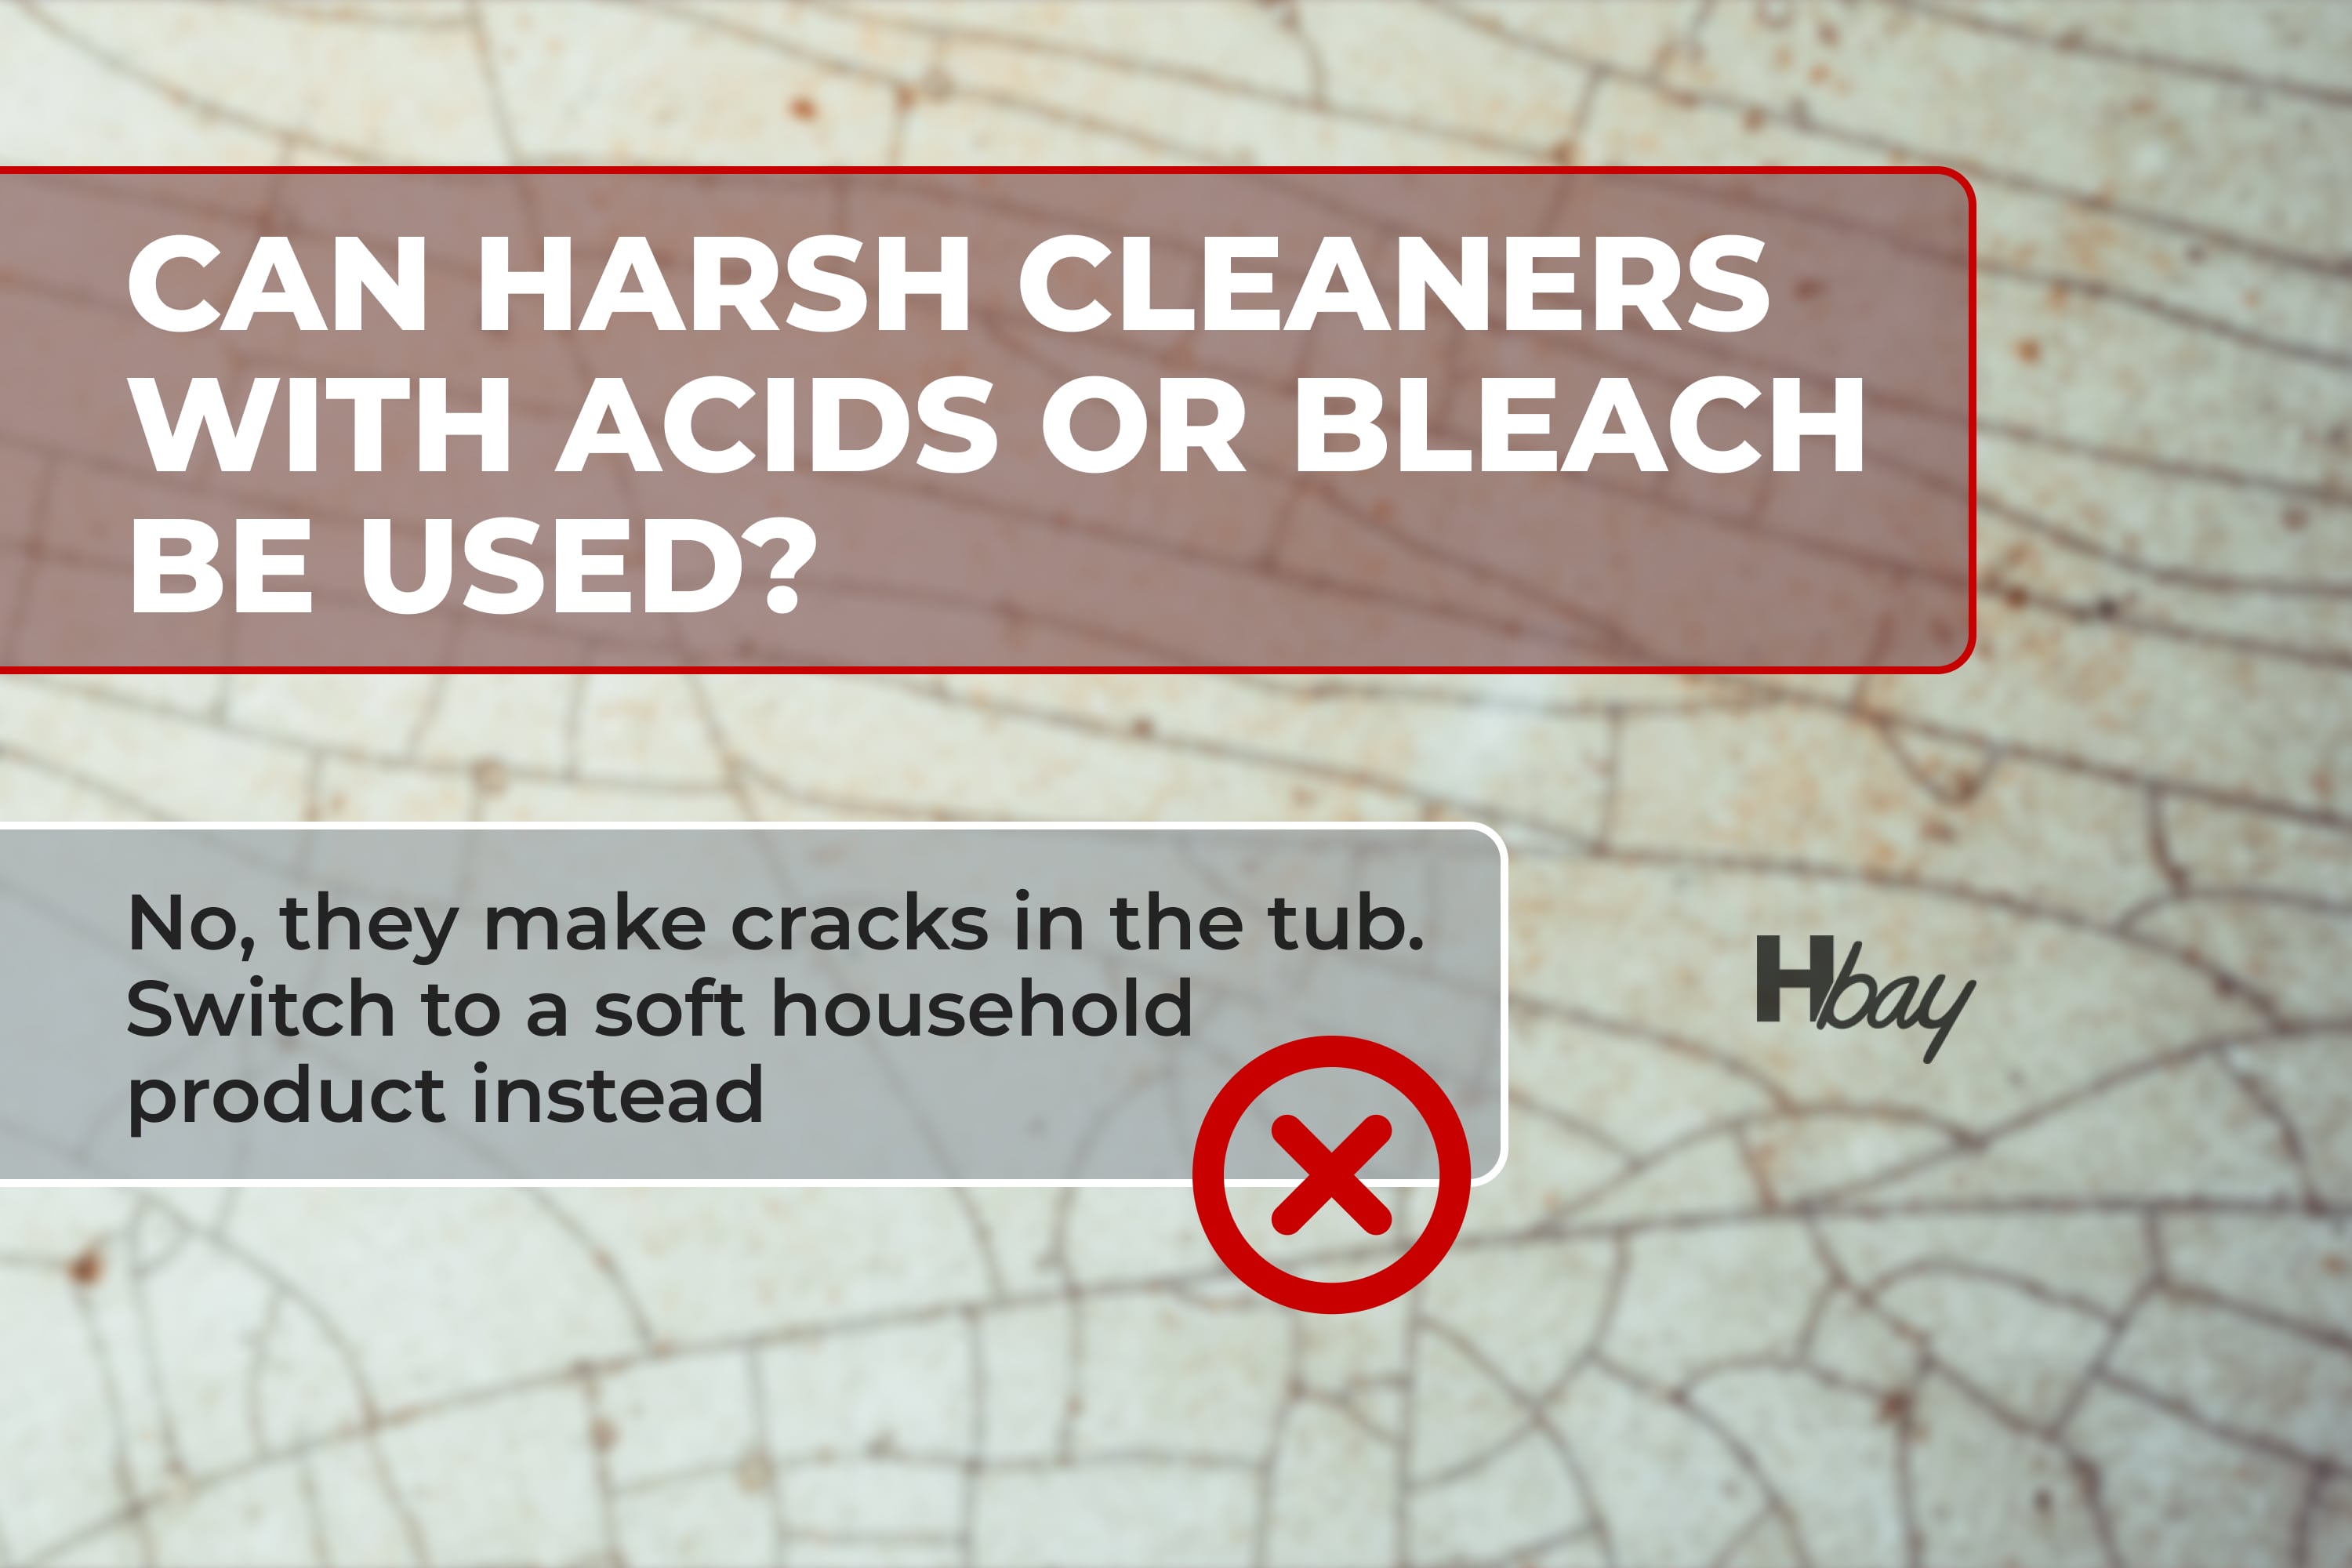 Can harsh cleaners with acids or bleach be used